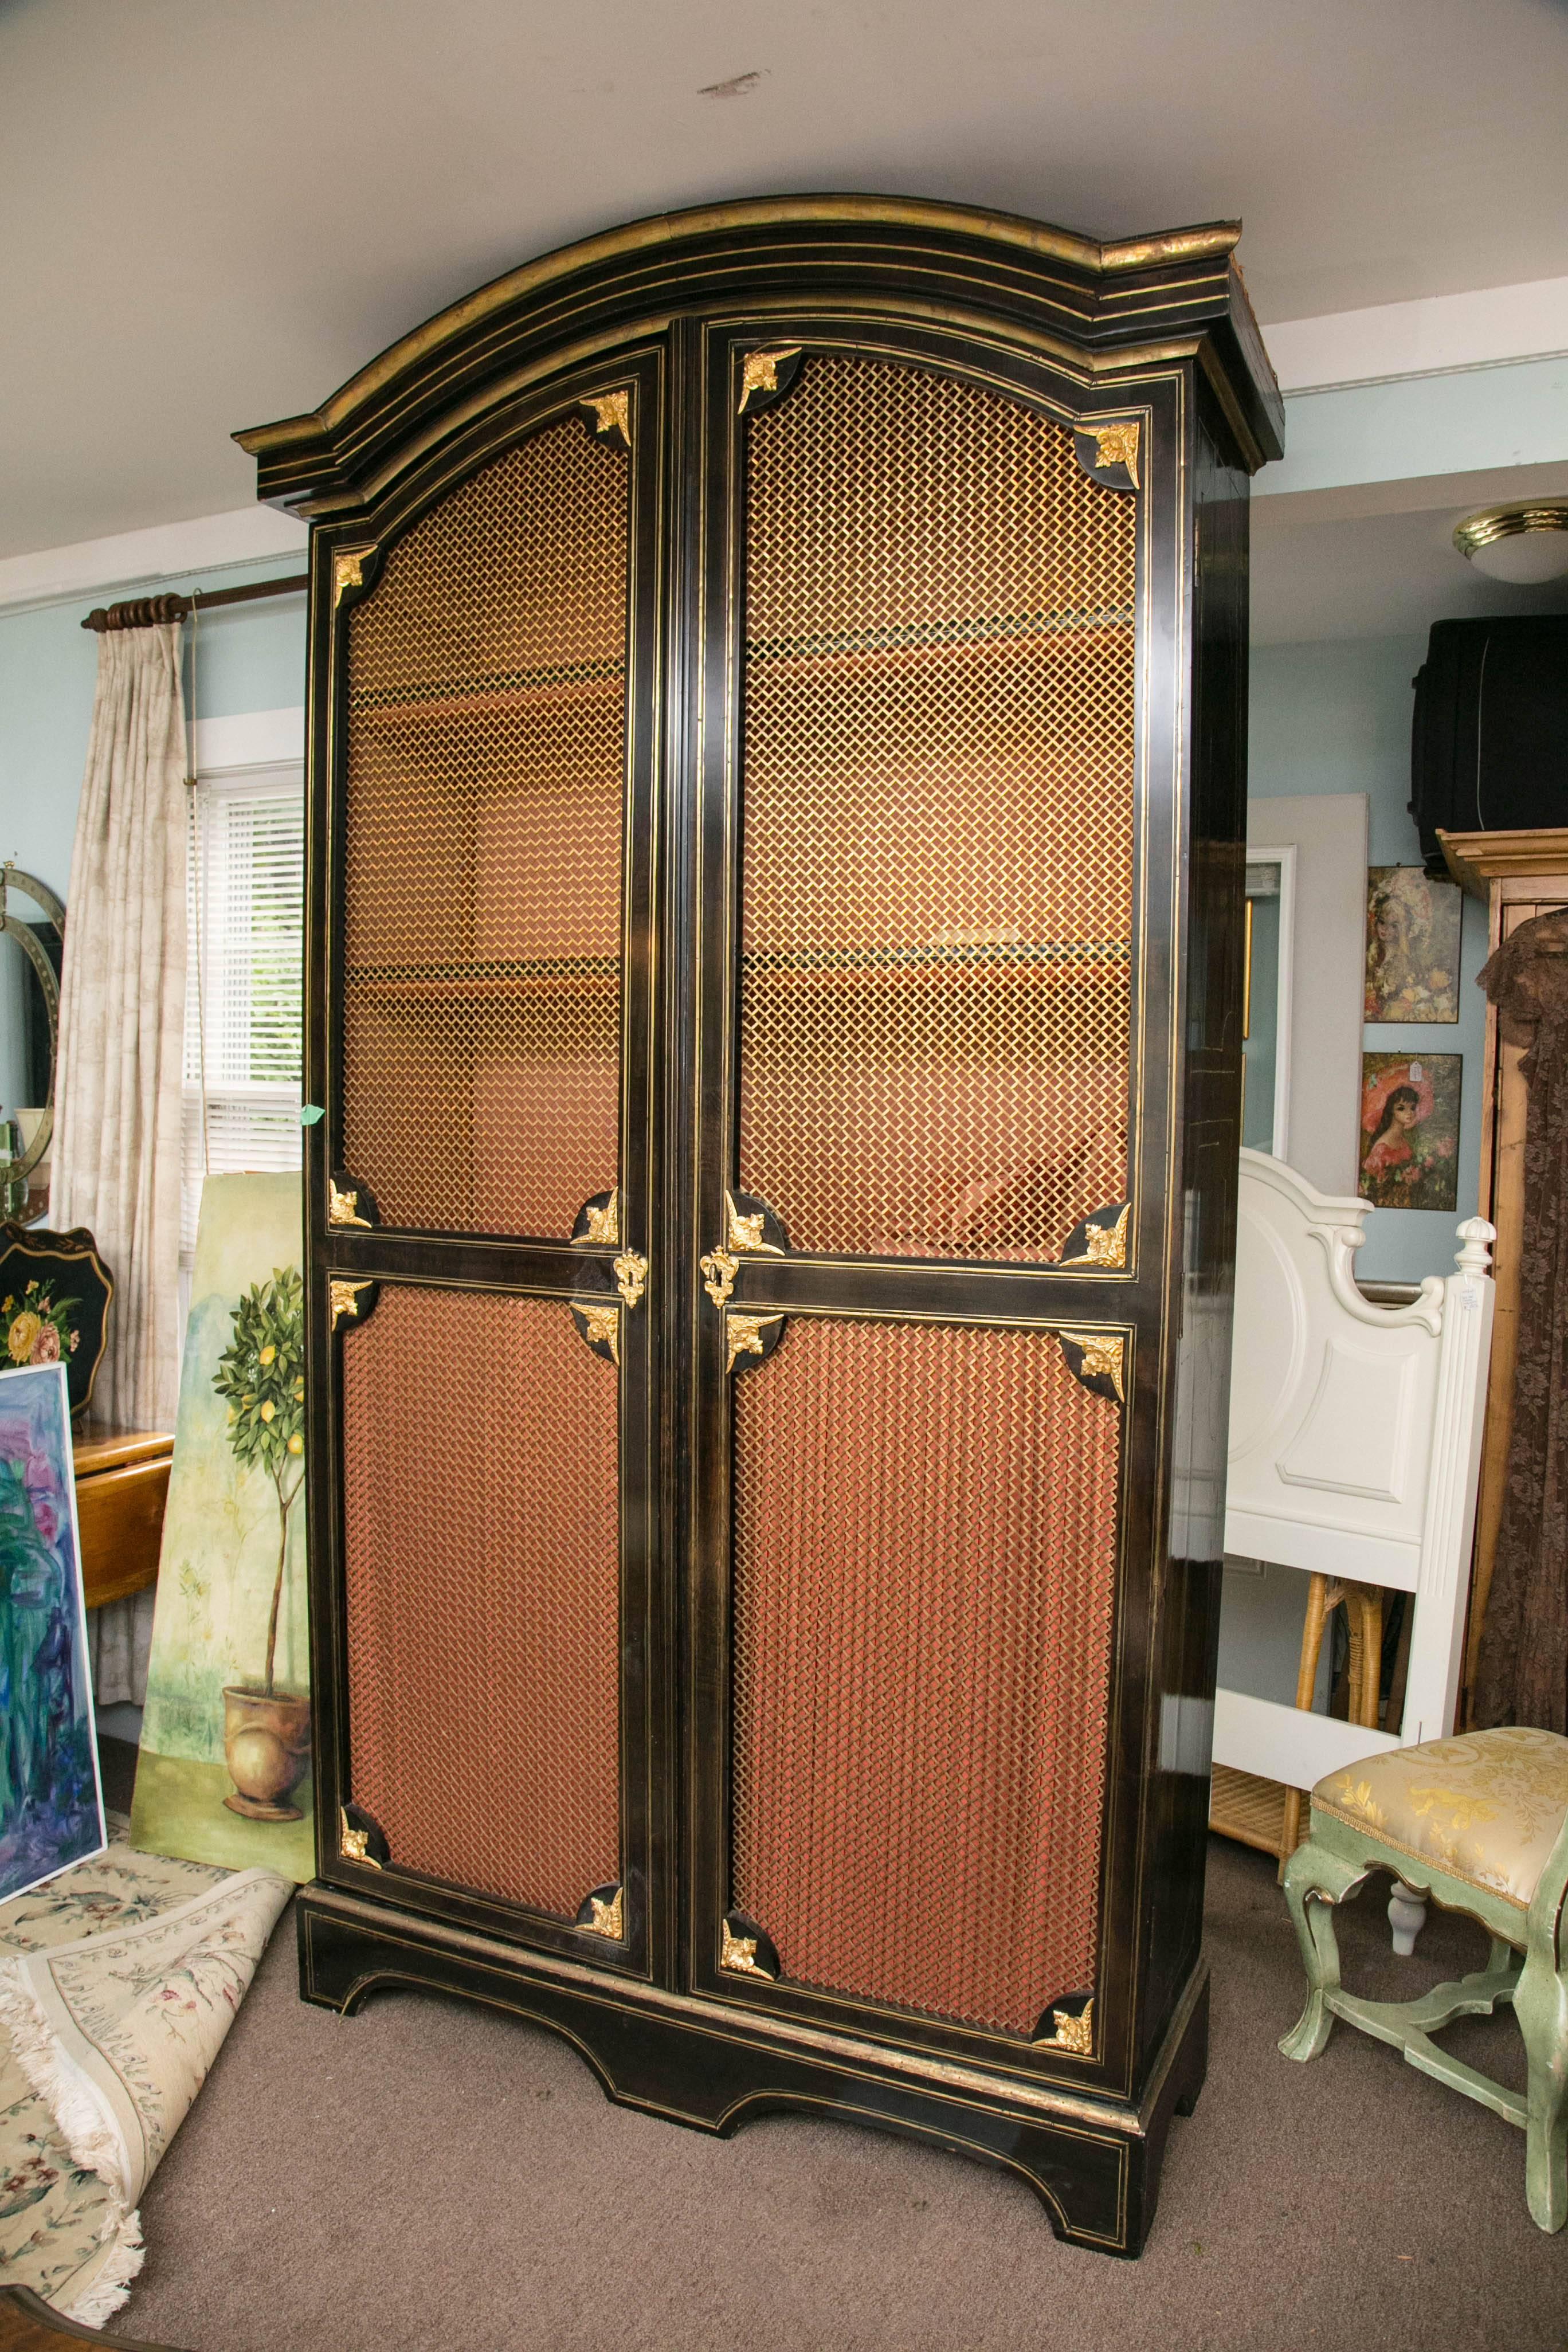 Maison Jansen monumentally fabulous Old World Mansion Maison Jansen book case/Armoire (lighted). Traditional influences that encompass livable, usable and dramatic aesthetics, this piece is an old world beauty from an Old World Connecticut Mansion.